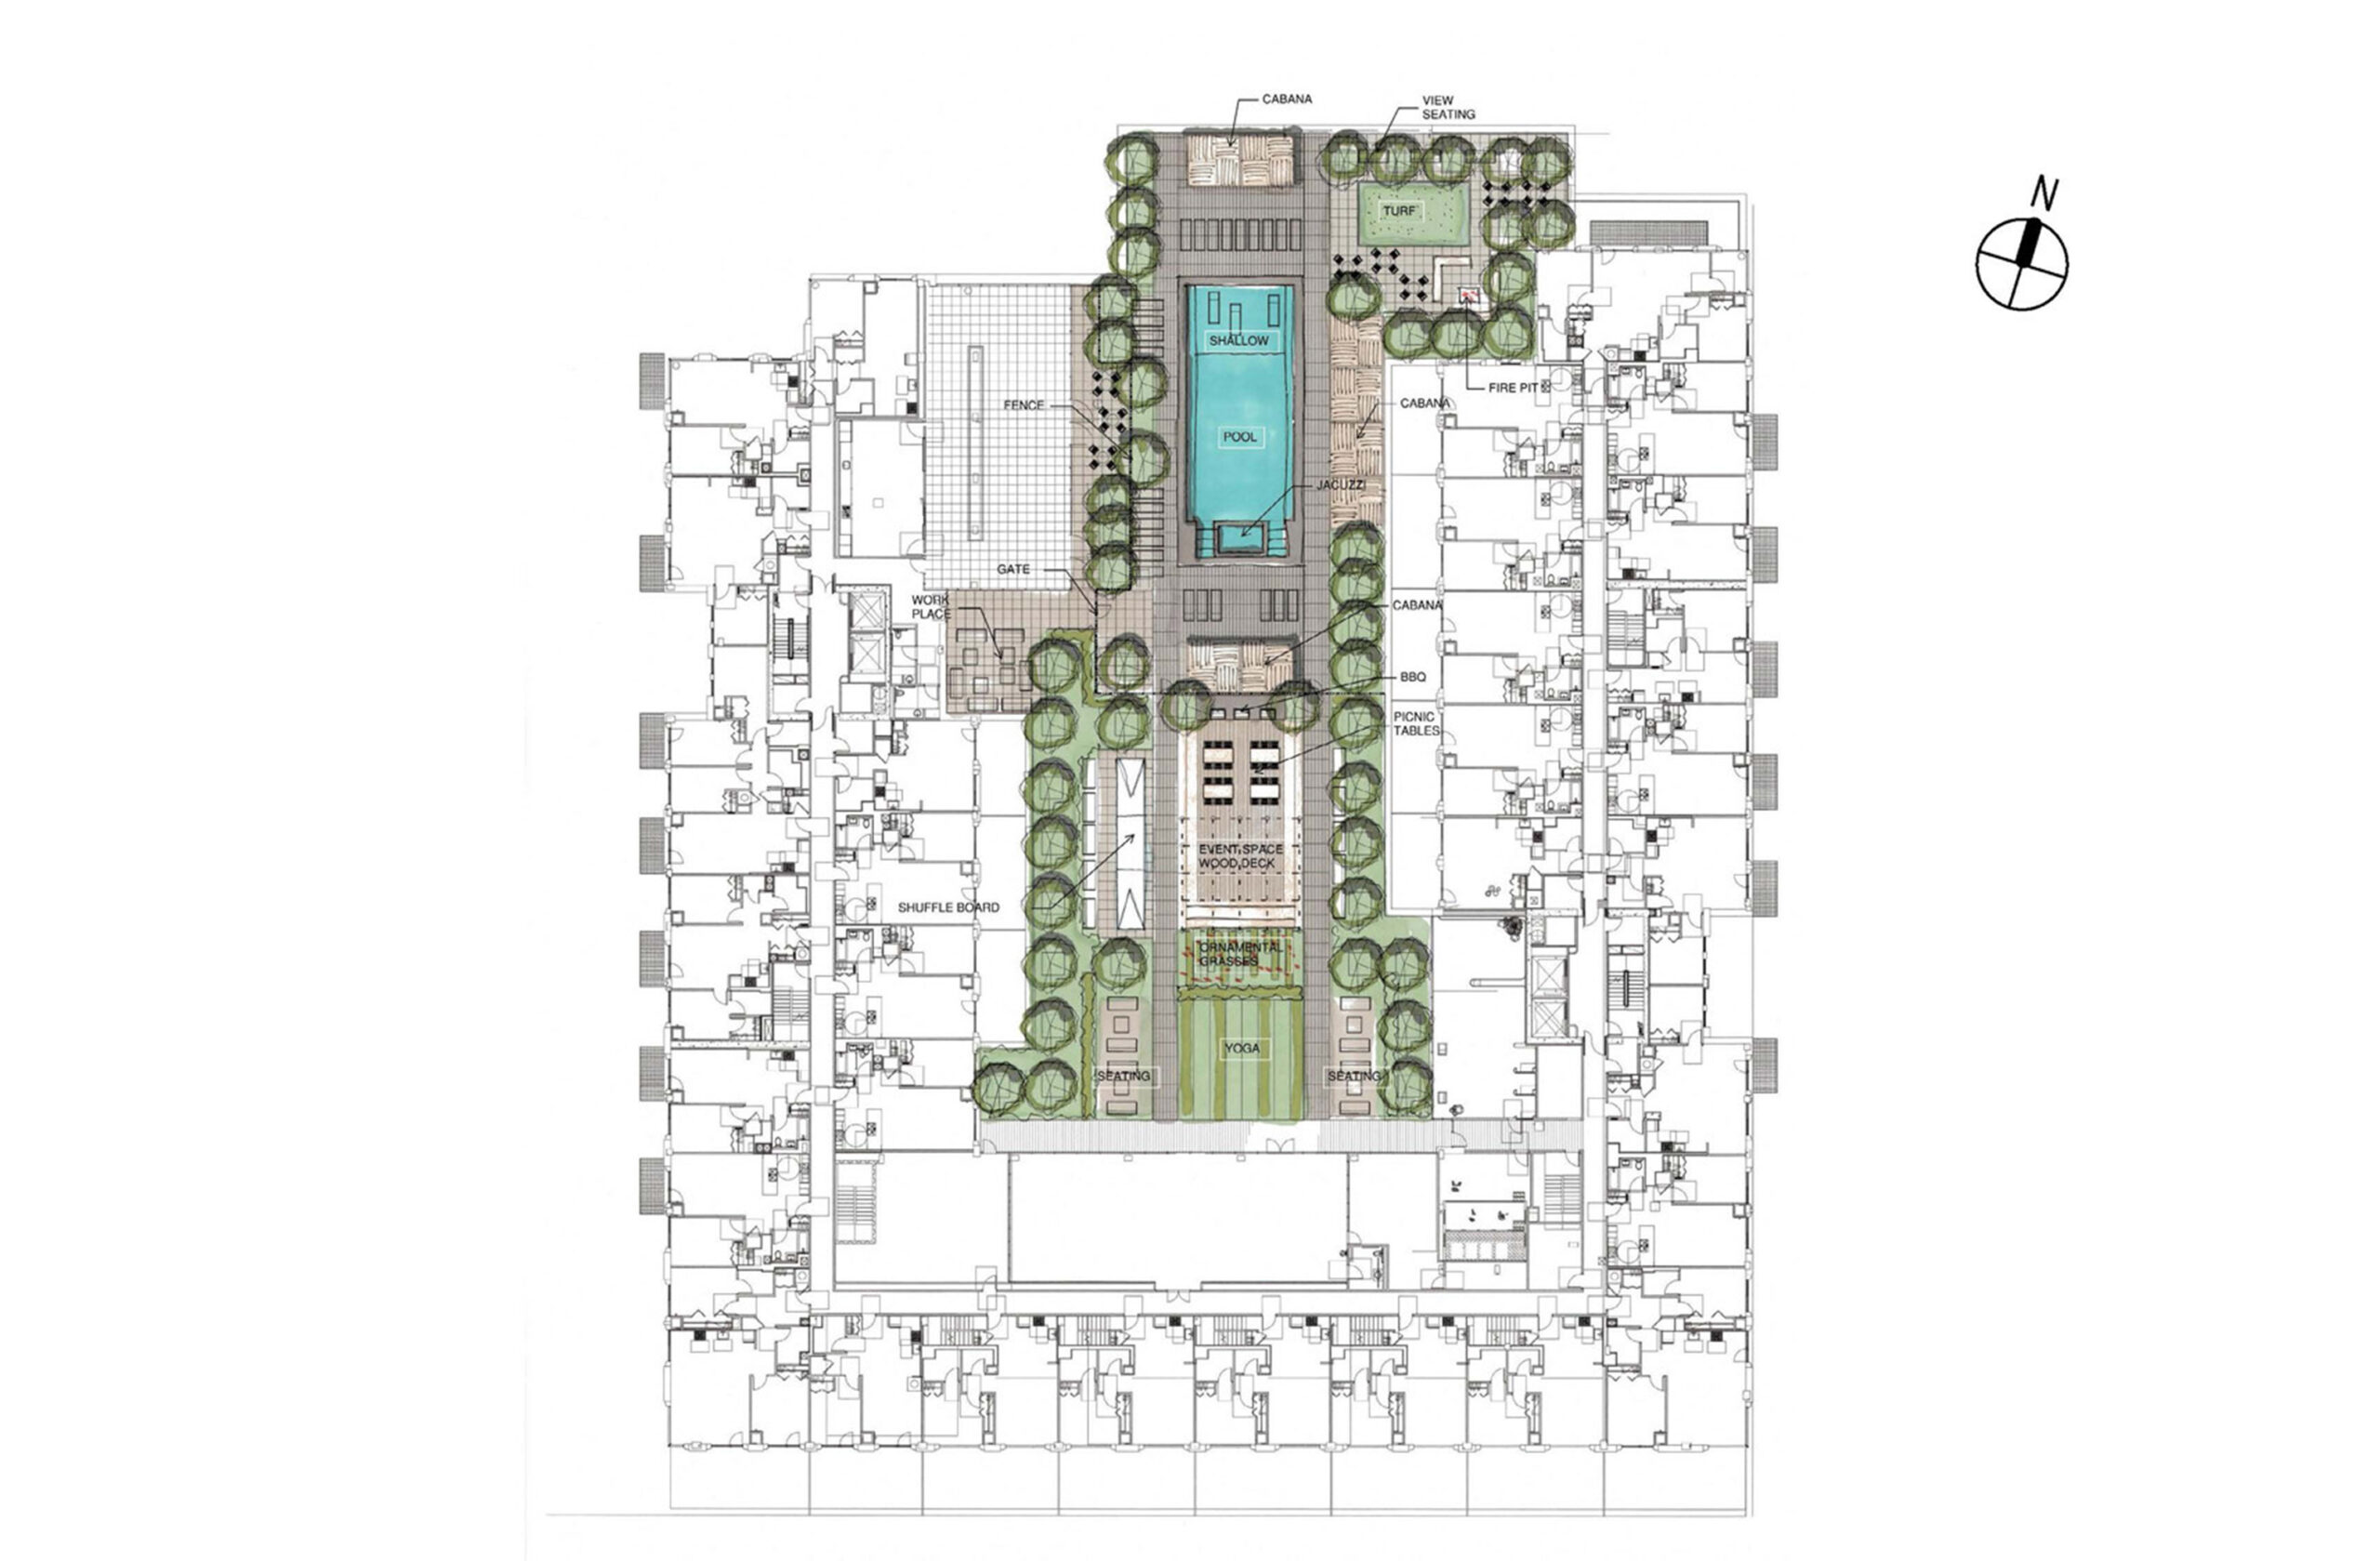 Conceptual design floor plan for a mixed-use development featuring a central pool, green spaces, and symmetrical layout of surrounding residential and commercial units. The design emphasizes balance and integration with nature.